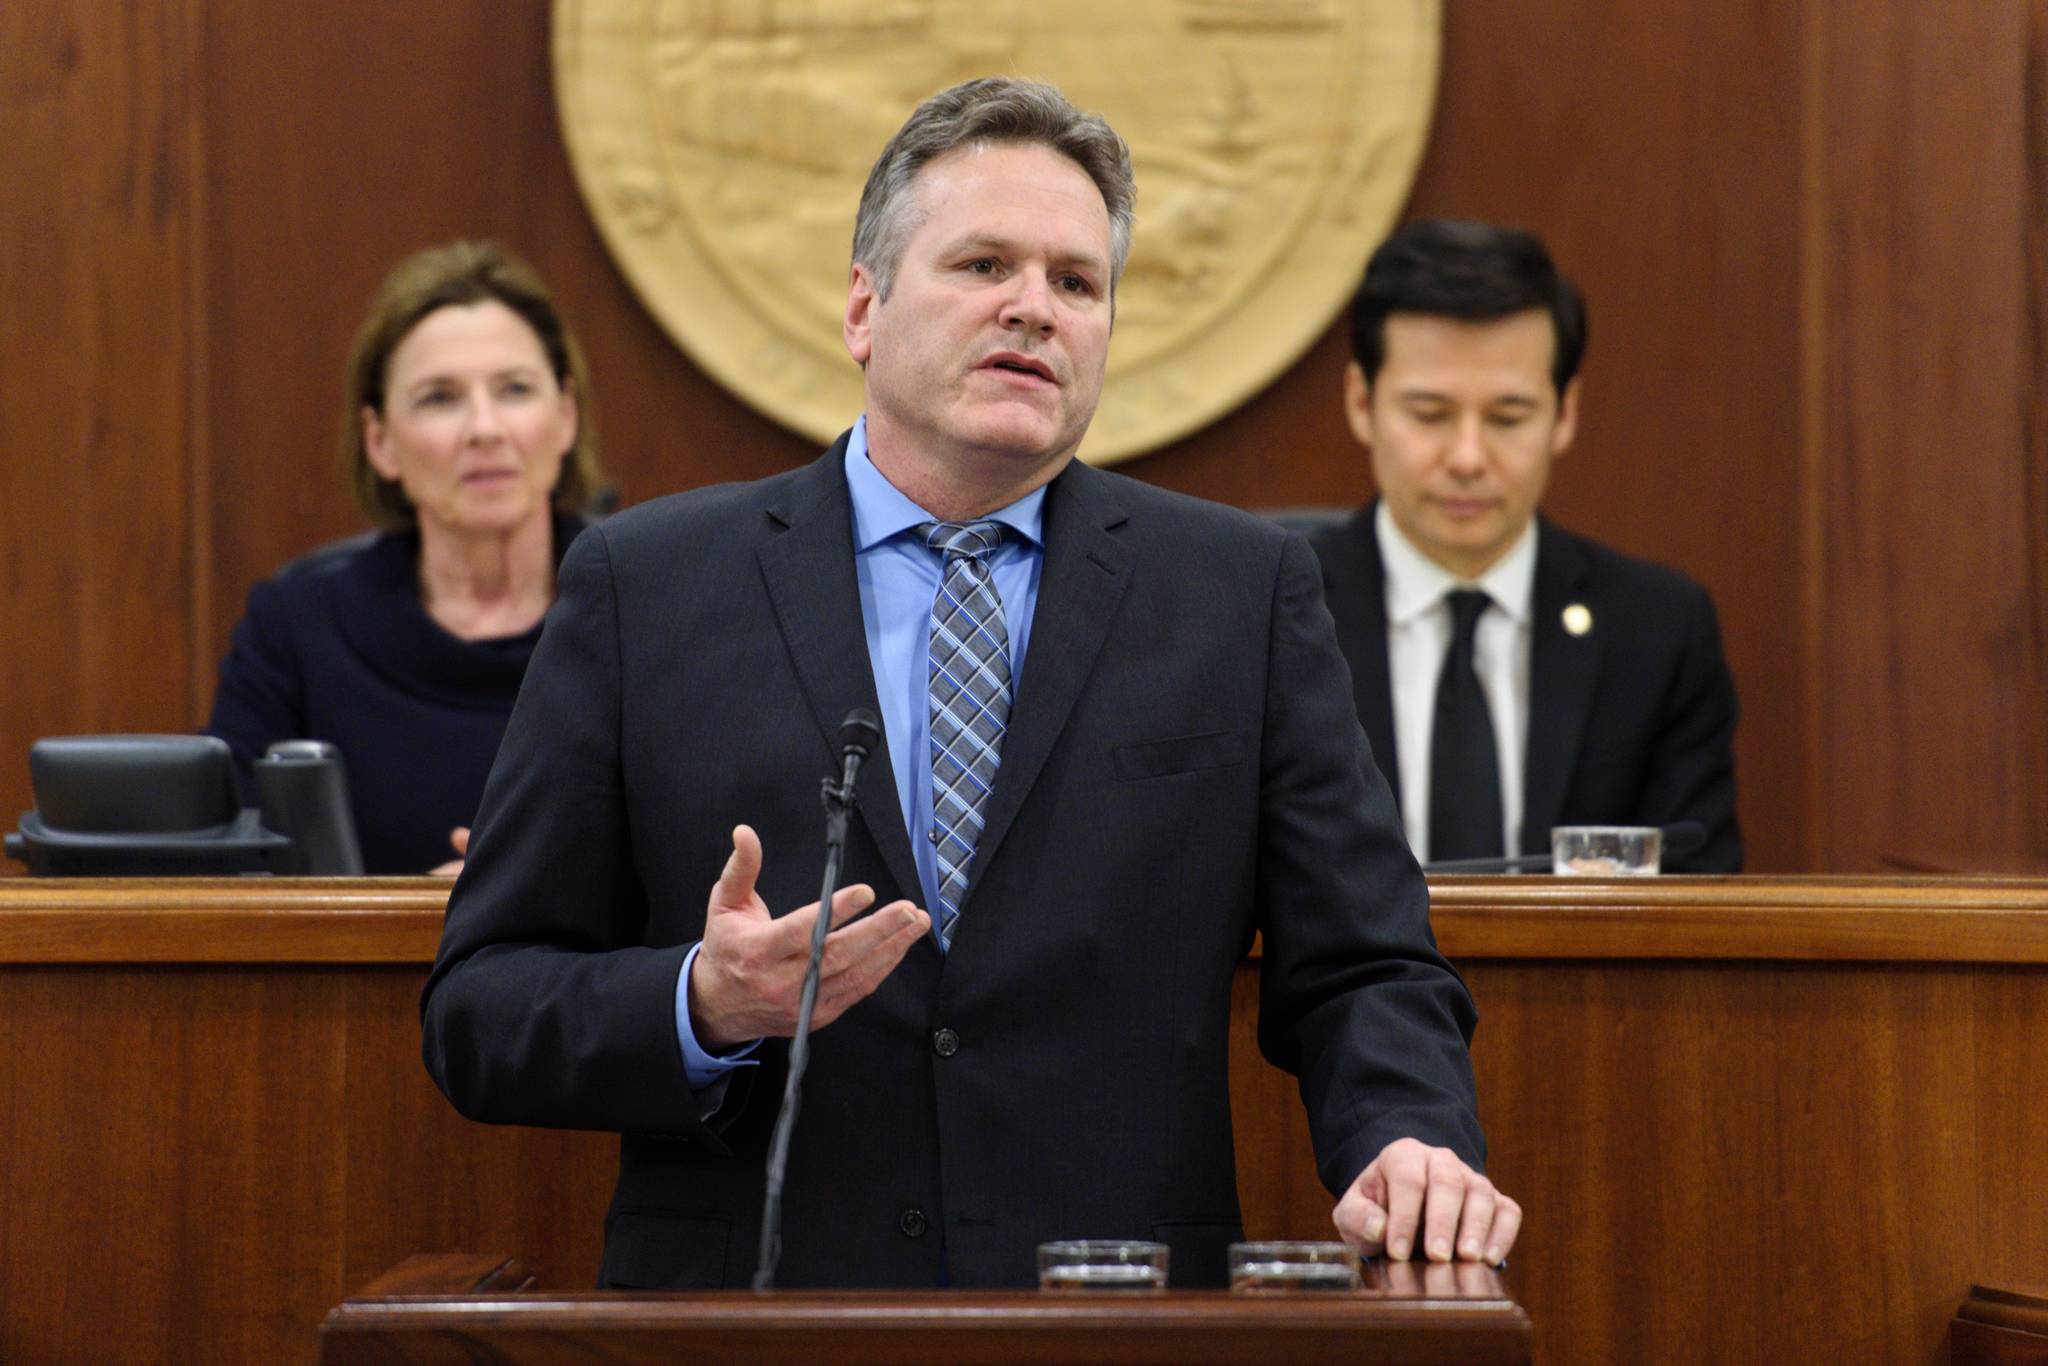 Gov. Mike Dunleavy delivers the State of the State address on Tuesday in the Alaska Capitol. (Michael Penn/Juneau Empire)